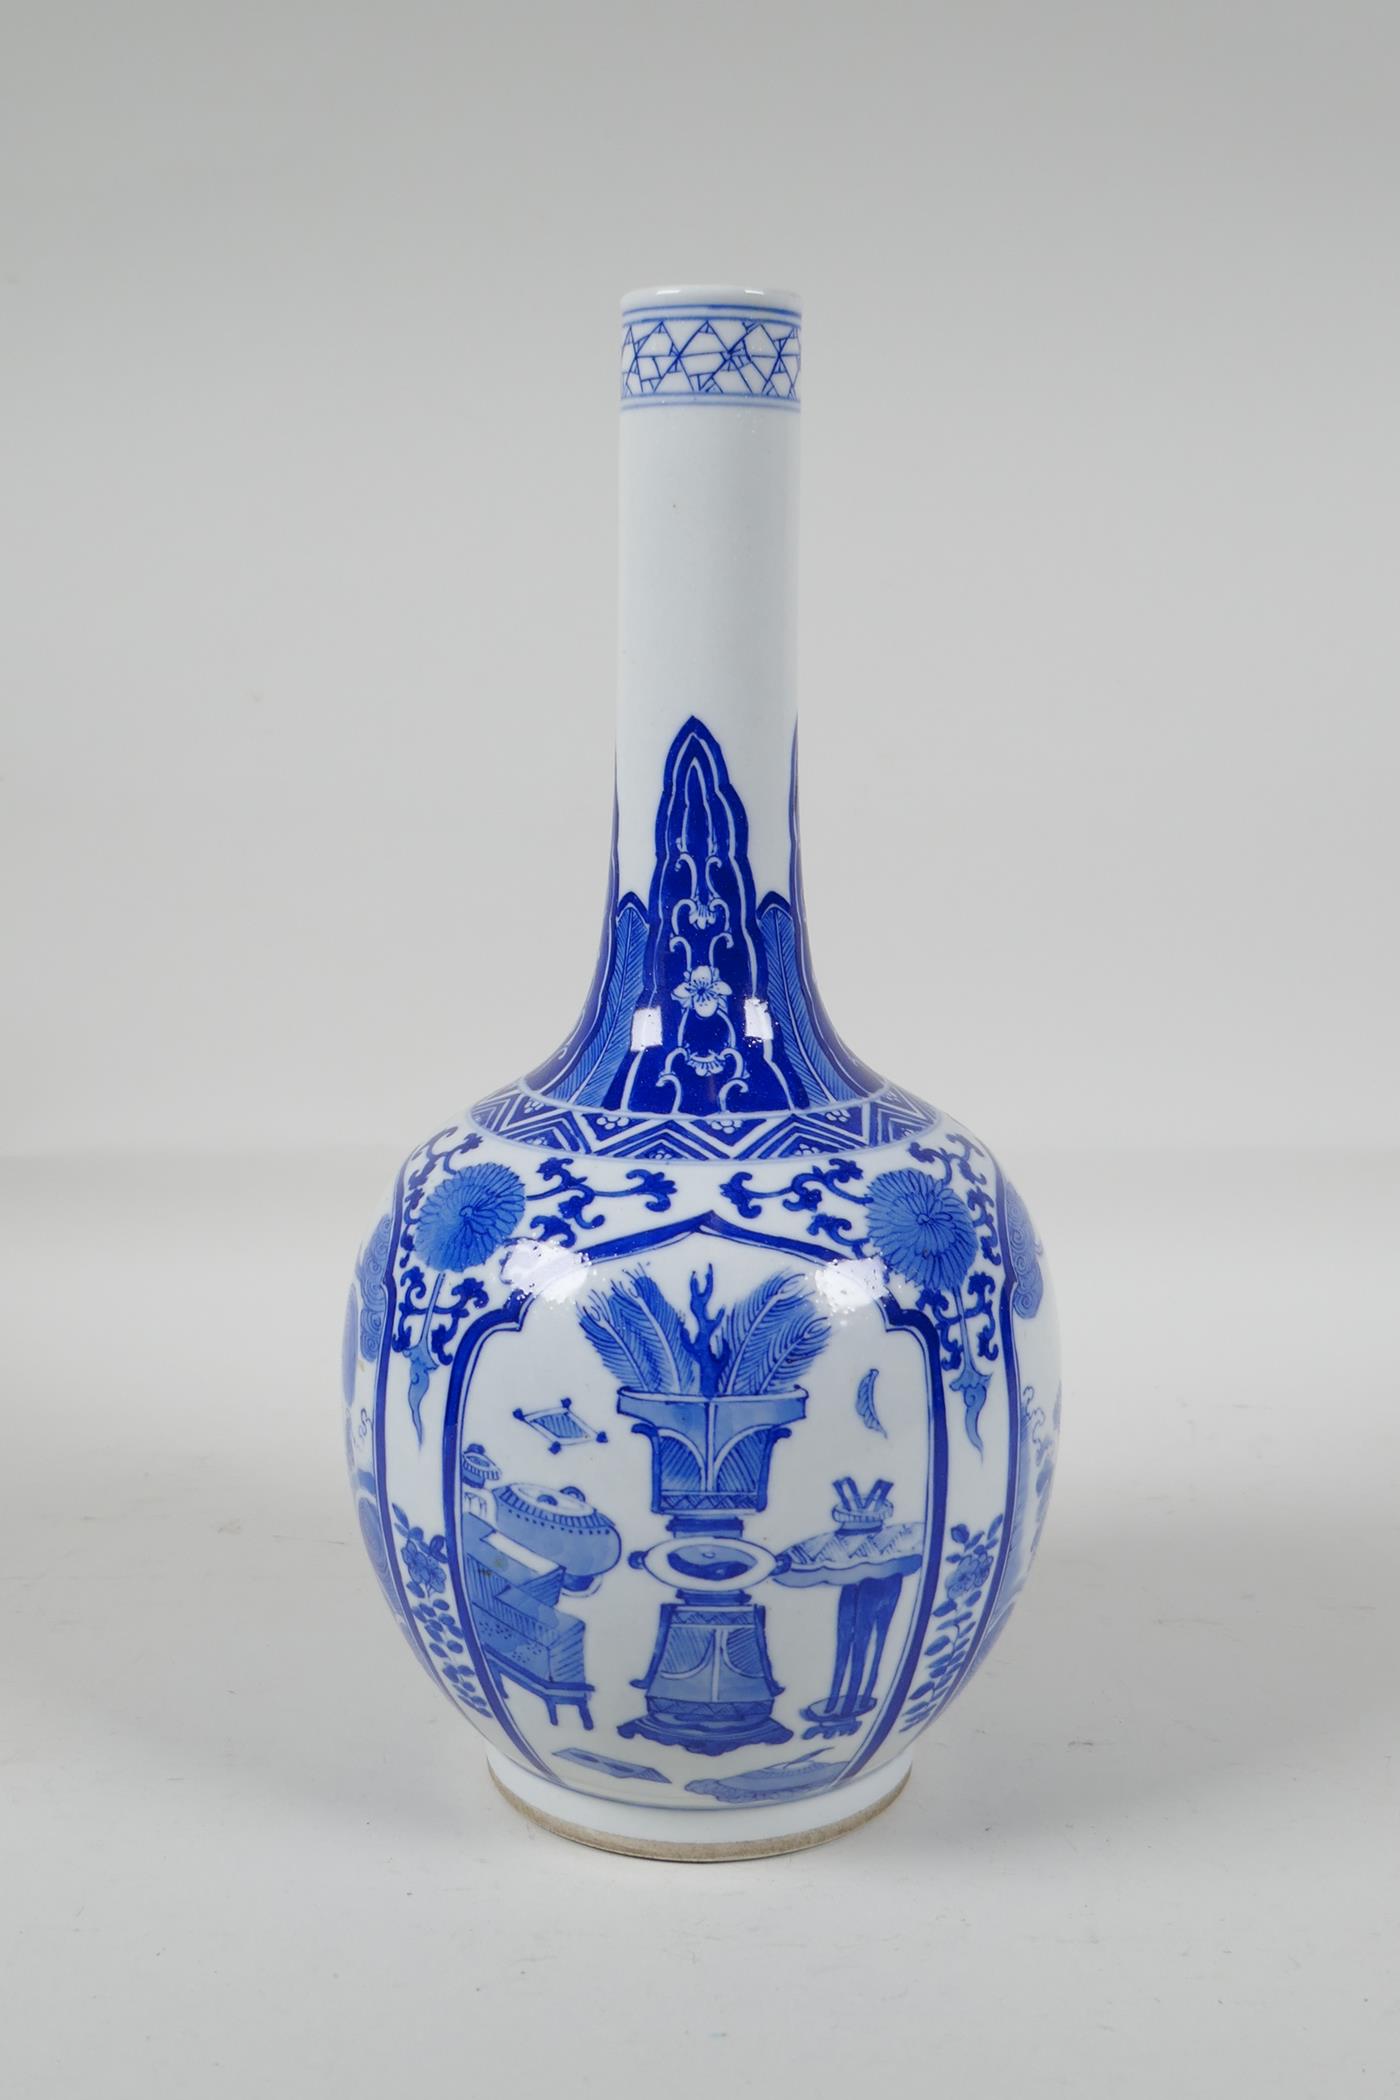 A blue & white porcelain bottle vase with decorative panels, depicting objects of virtue & kylin, - Image 3 of 5